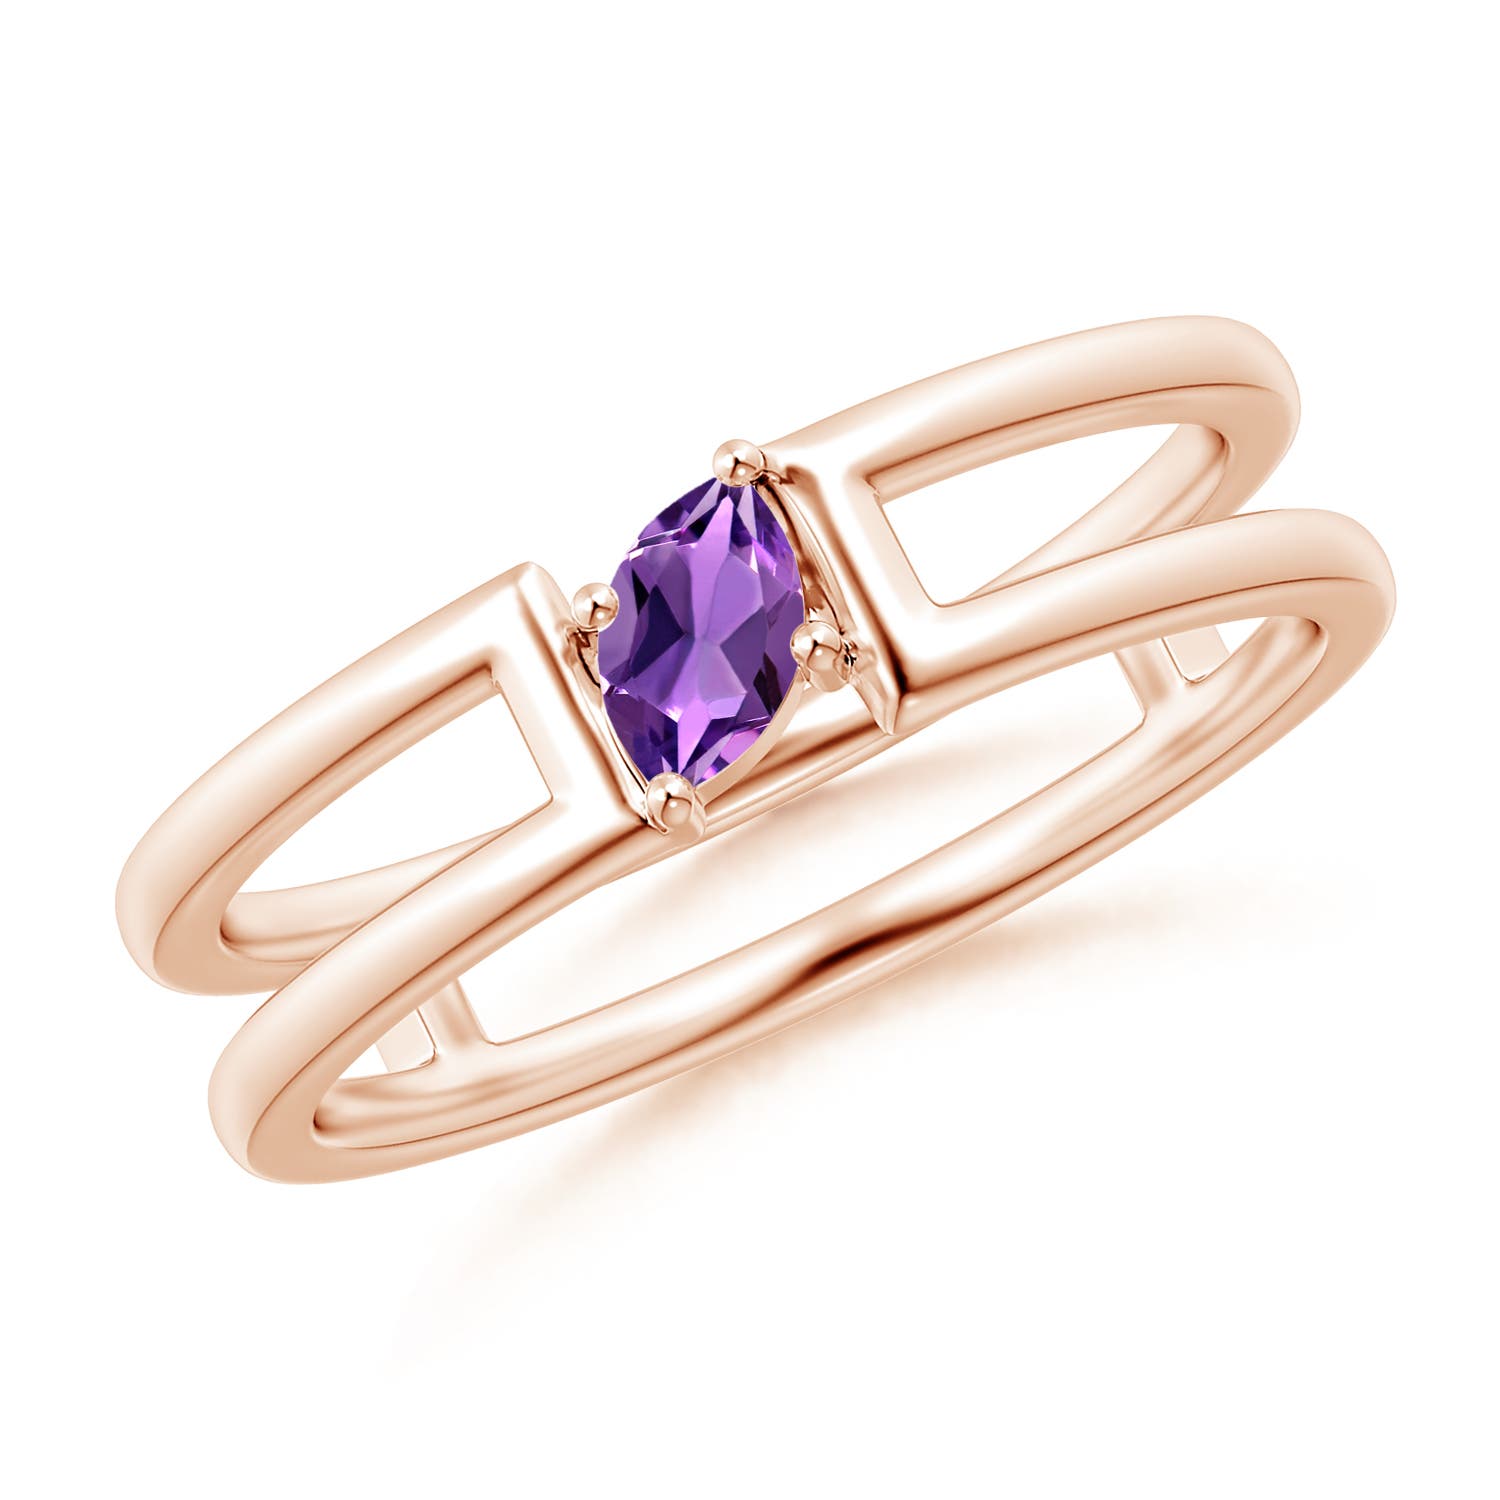 AAA - Amethyst / 0.13 CT / 14 KT Rose Gold